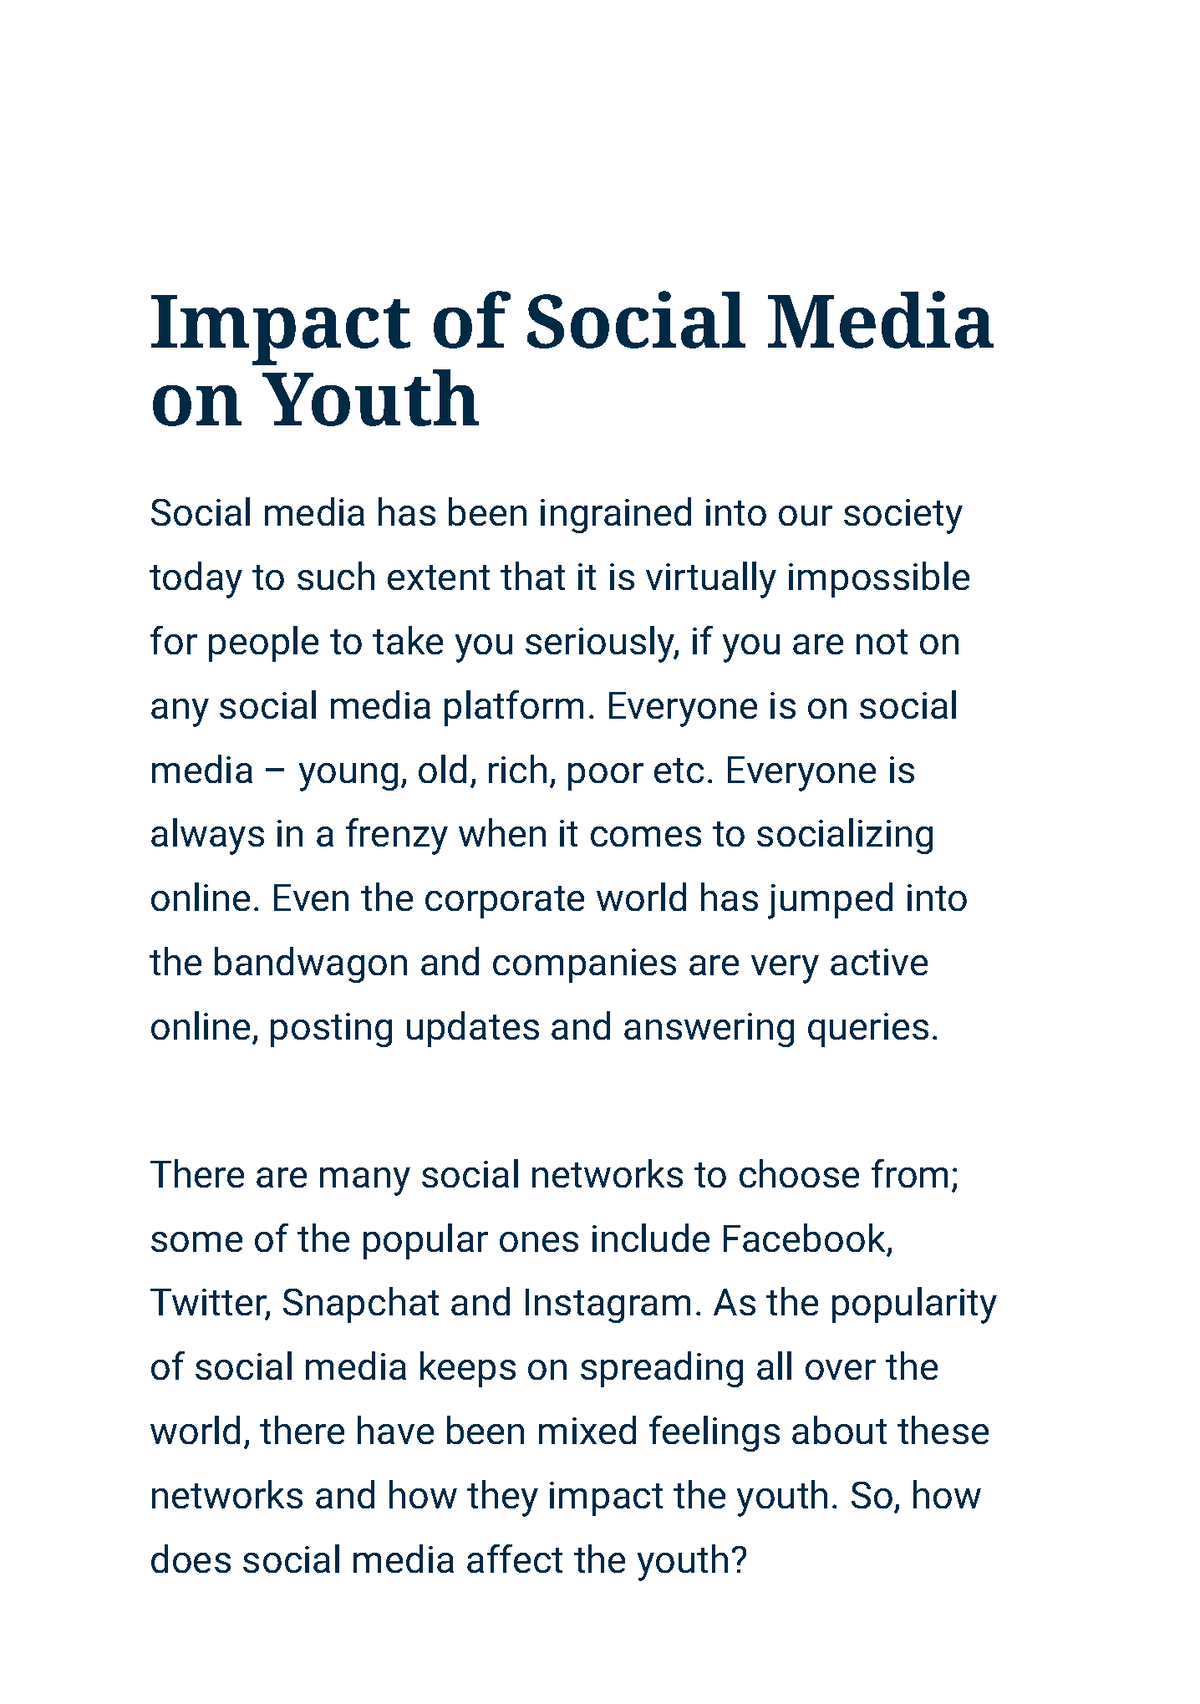 essay on social media effects on youth